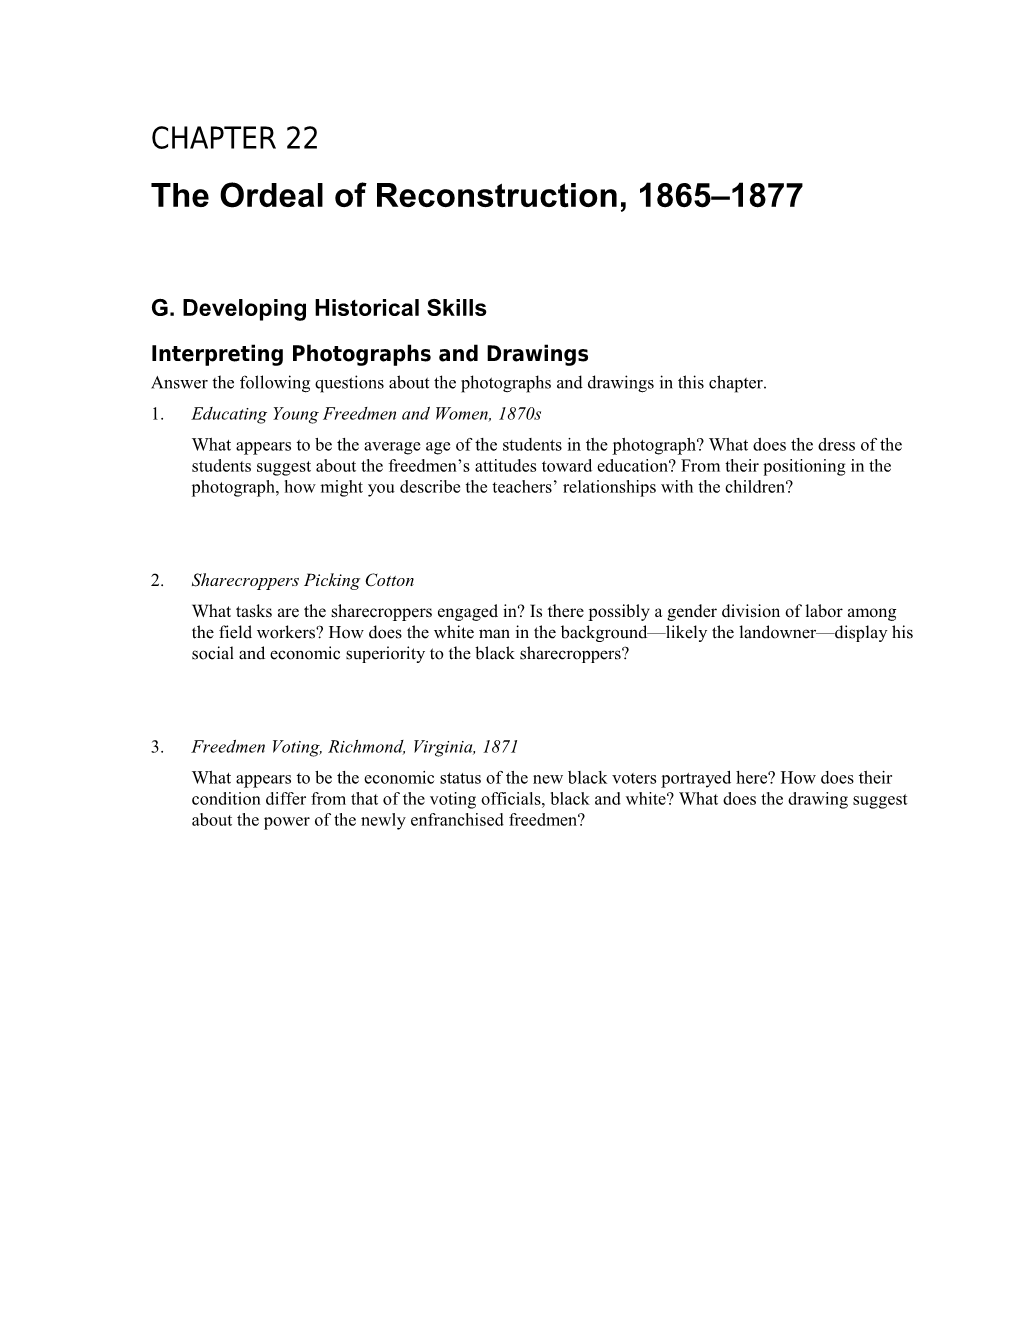 The Ordeal of Reconstruction, 1865 1877